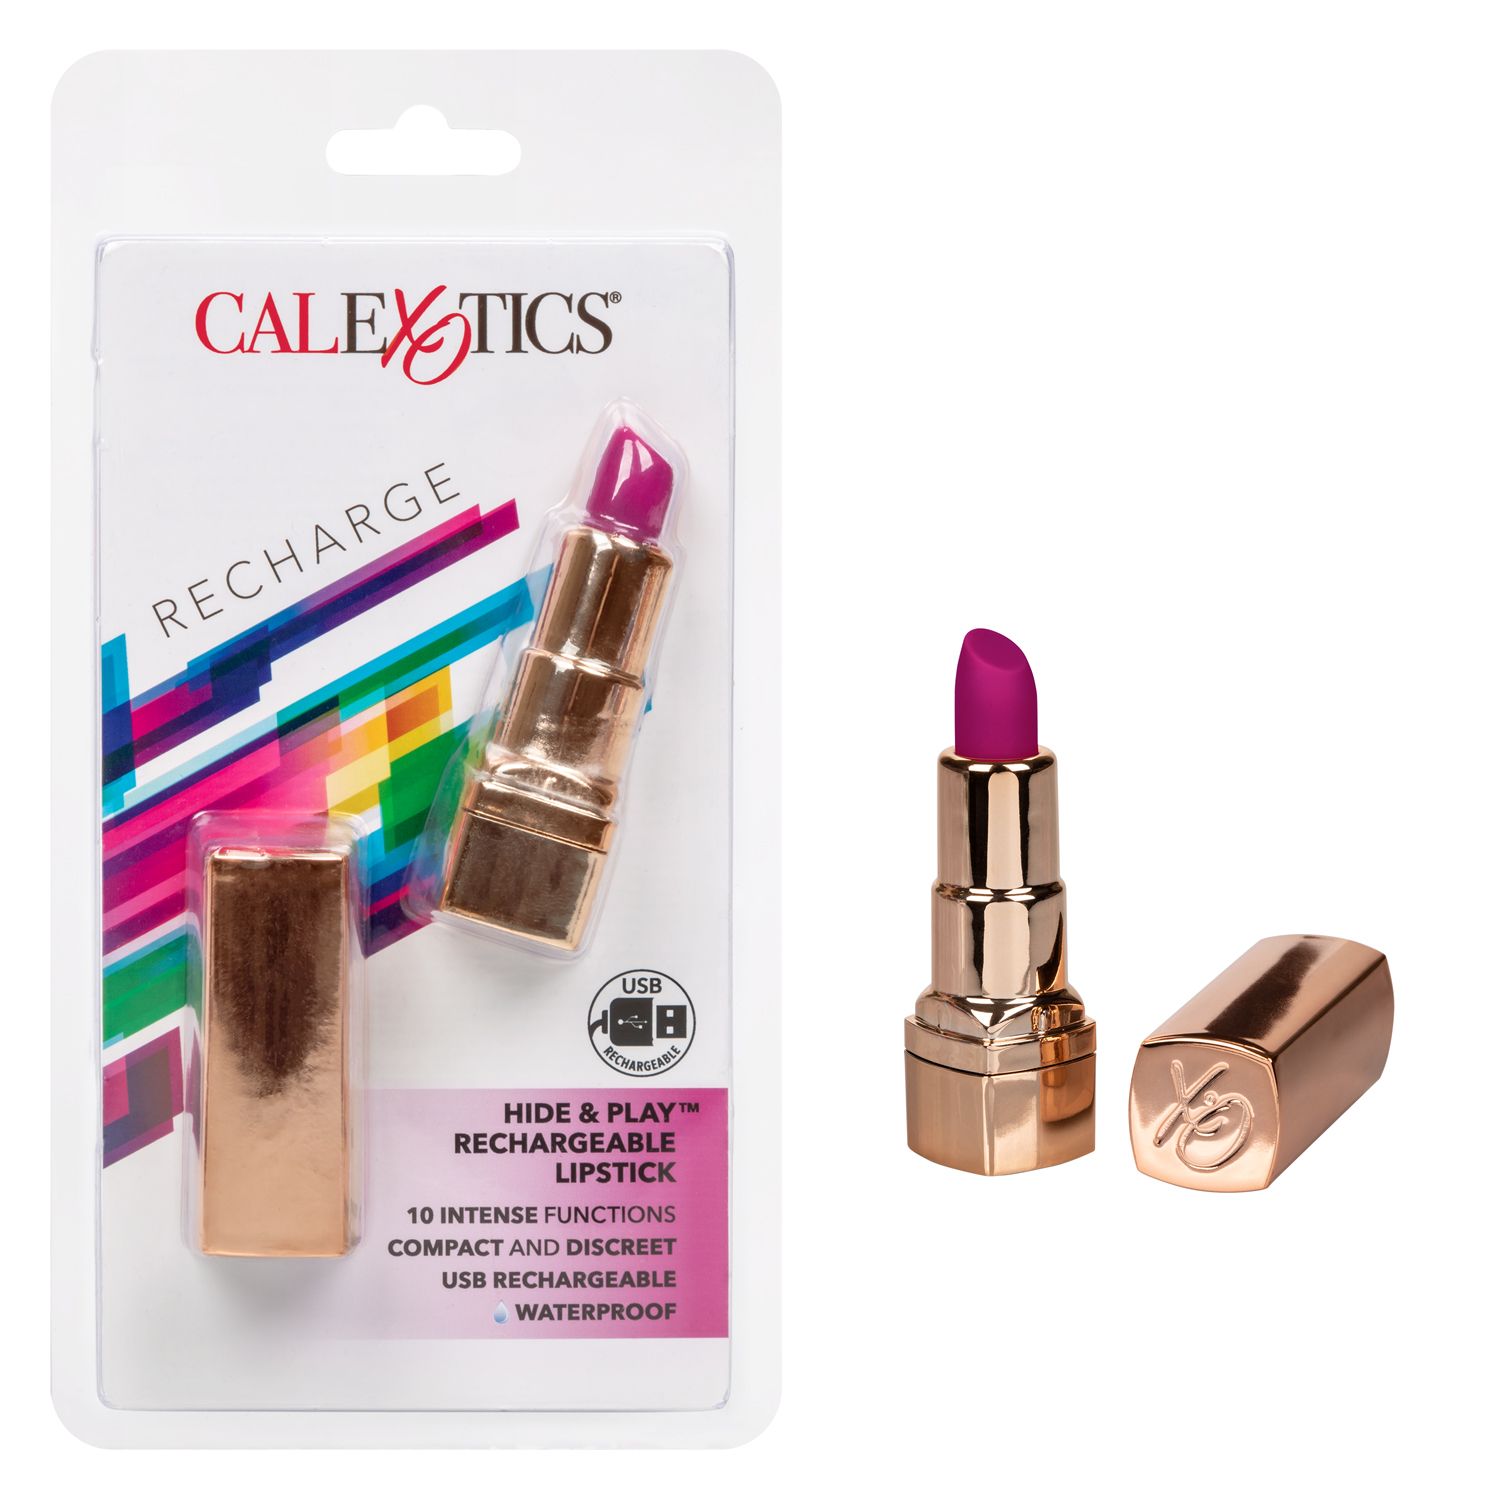 HIDE & PLAY RECHARGEABLE LIPSTICK PURPLE - Click Image to Close